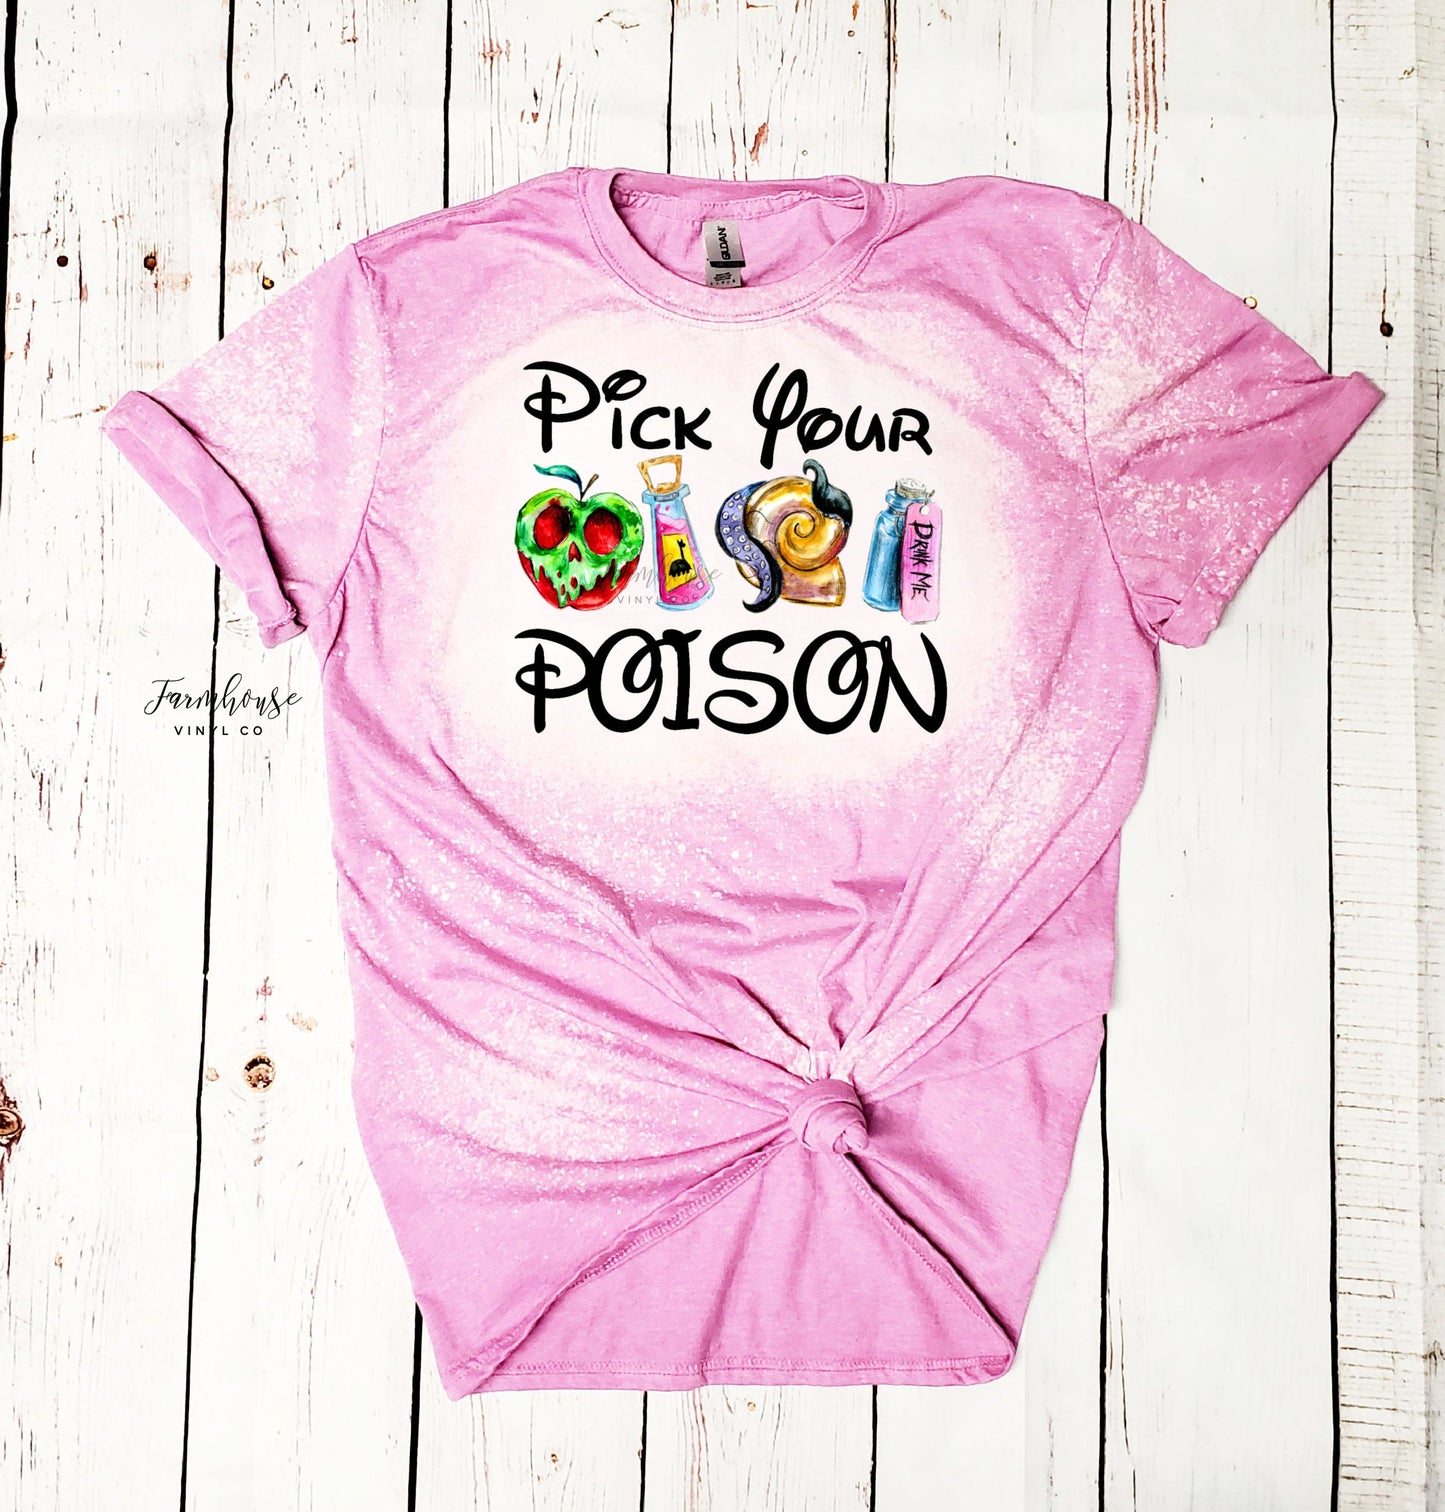 Pick Your Poison Villain Shirt / Magical Vacation Shirt / Poison Apple / Group Matching Shirts / Halloween Vacation Shirts / Villain Fan - Farmhouse Vinyl Co